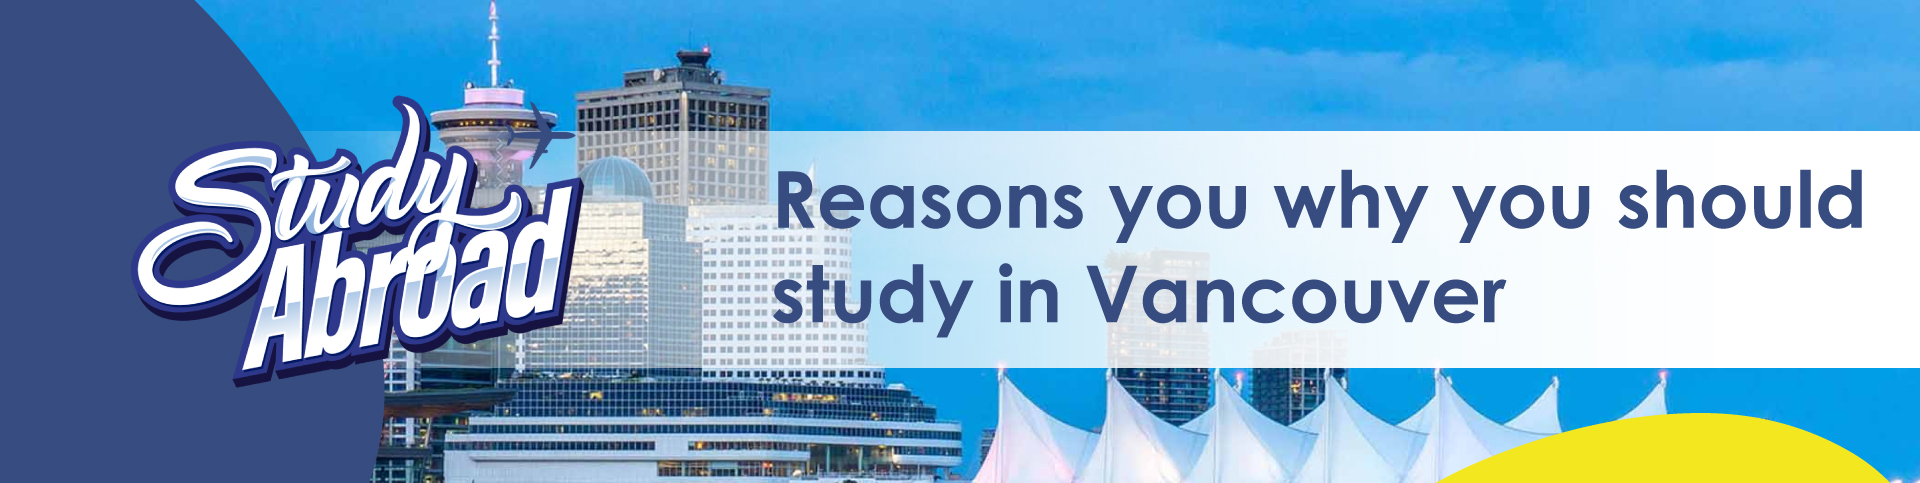 Reasons Why You Should Study in Vancouver